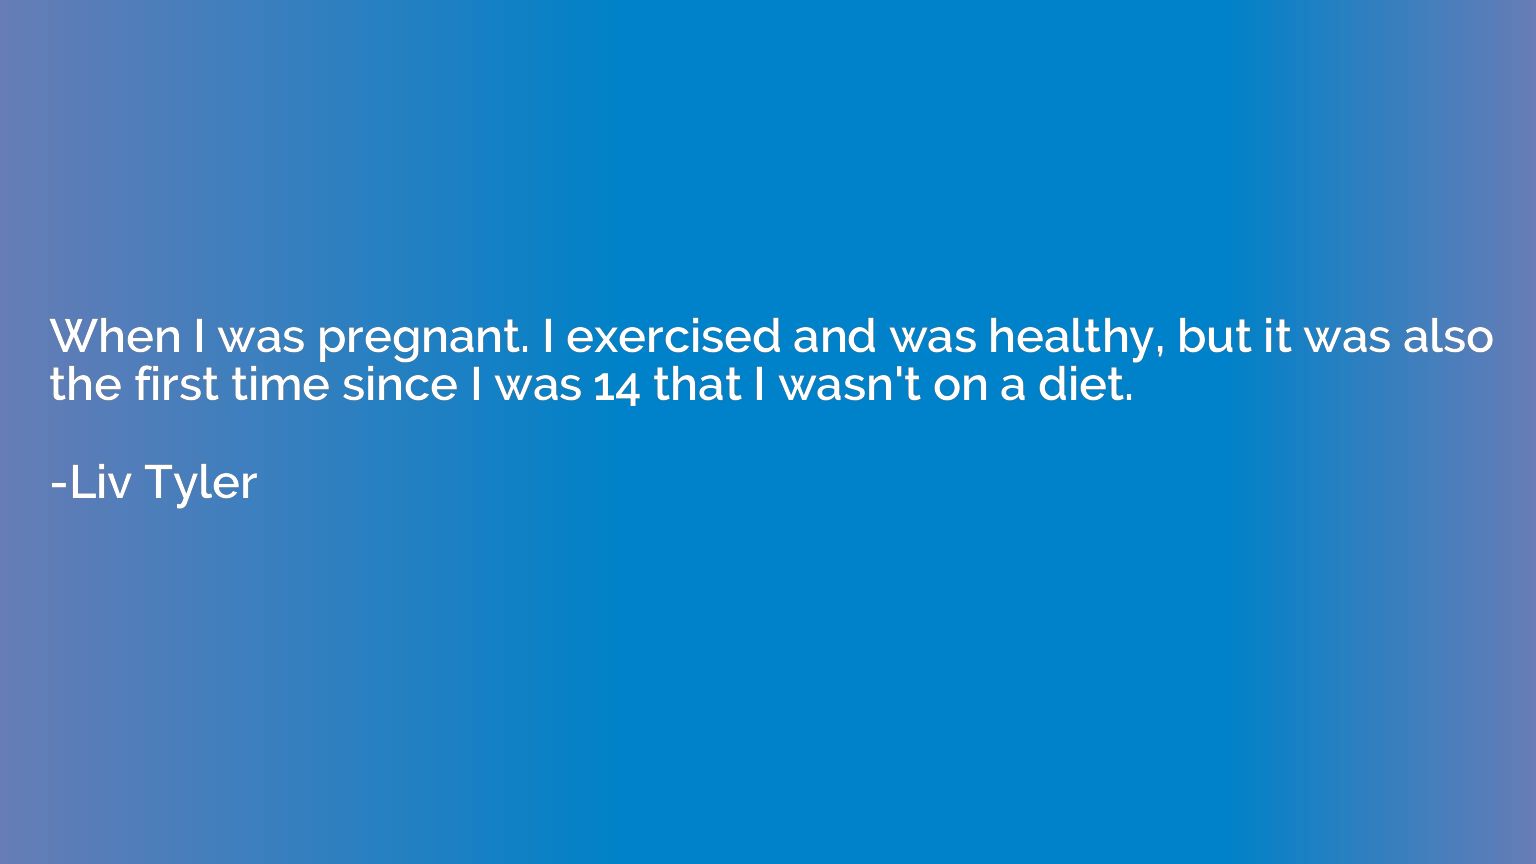 When I was pregnant. I exercised and was healthy, but it was